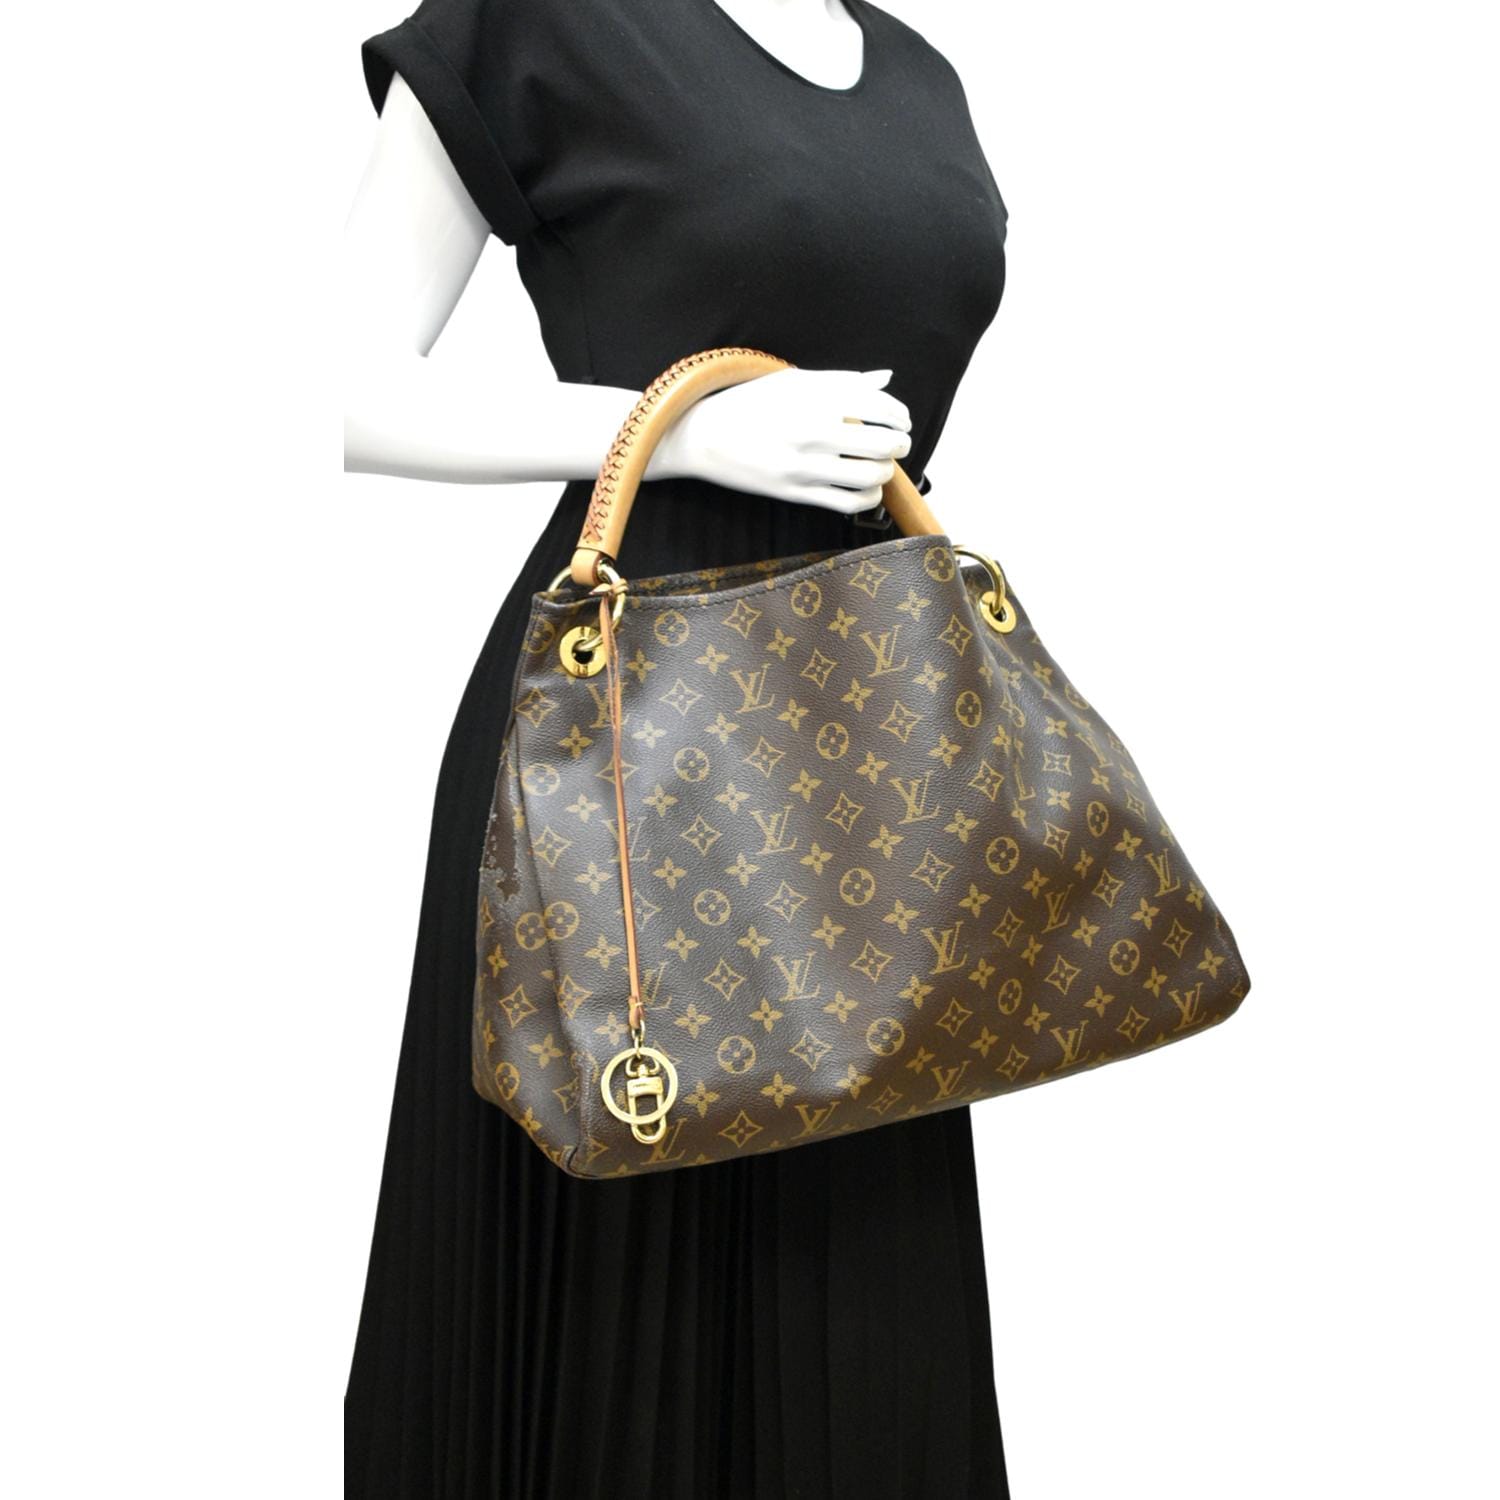 Liked New~LOUIS VUITTON "Artsy" Classic Brown Monogram MM  Shoulder Bag